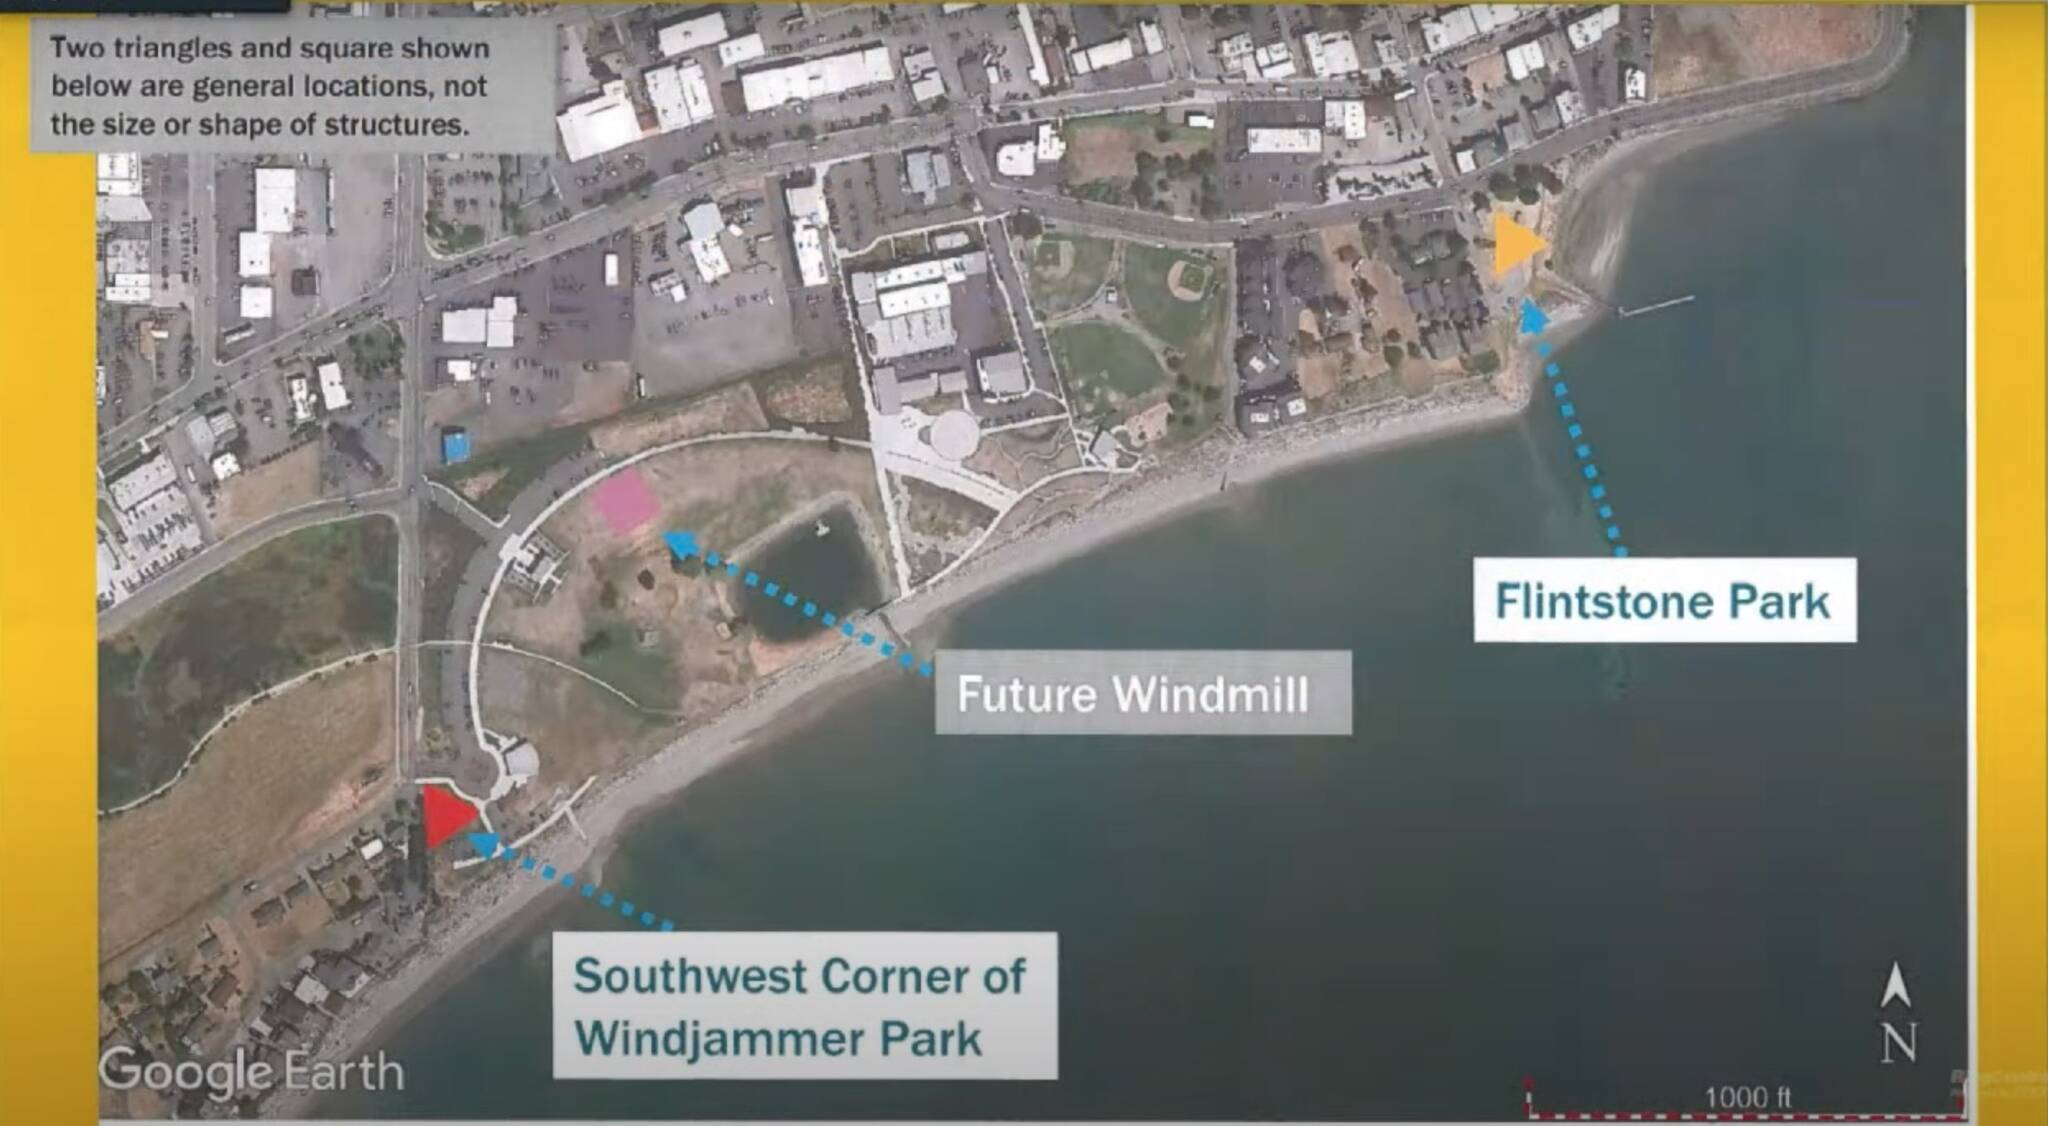 Image provided
A map shows the two proposed locations of the angel sculpture, as well as the proposed location of the new windmill.